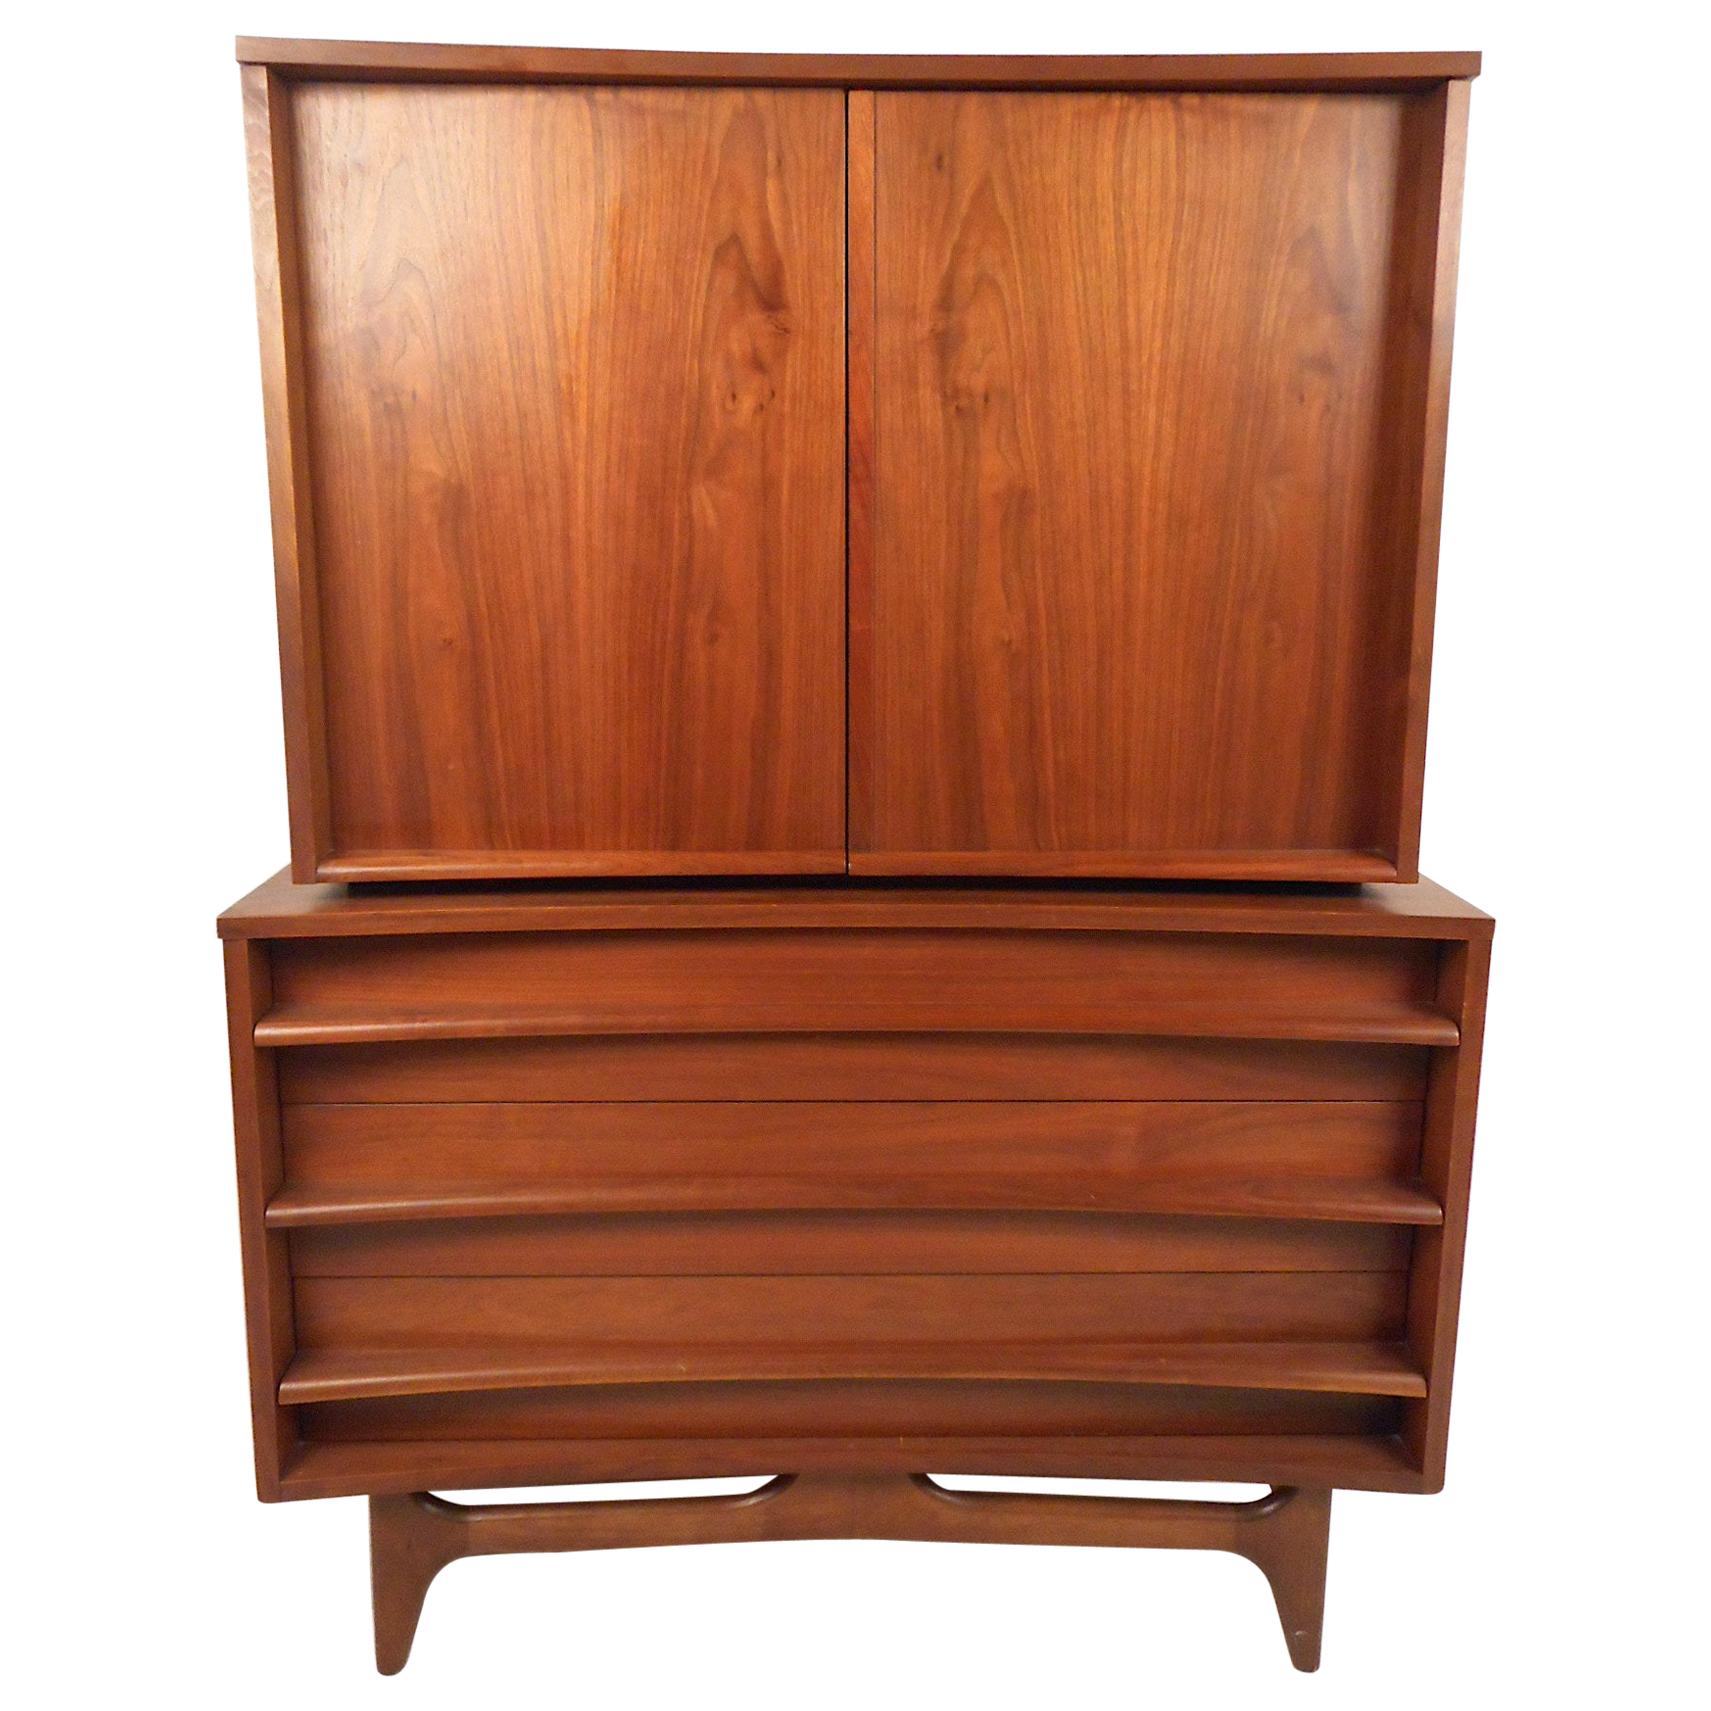 Mid-Century Modern Highboy Dresser with Curved Drawer-Fronts